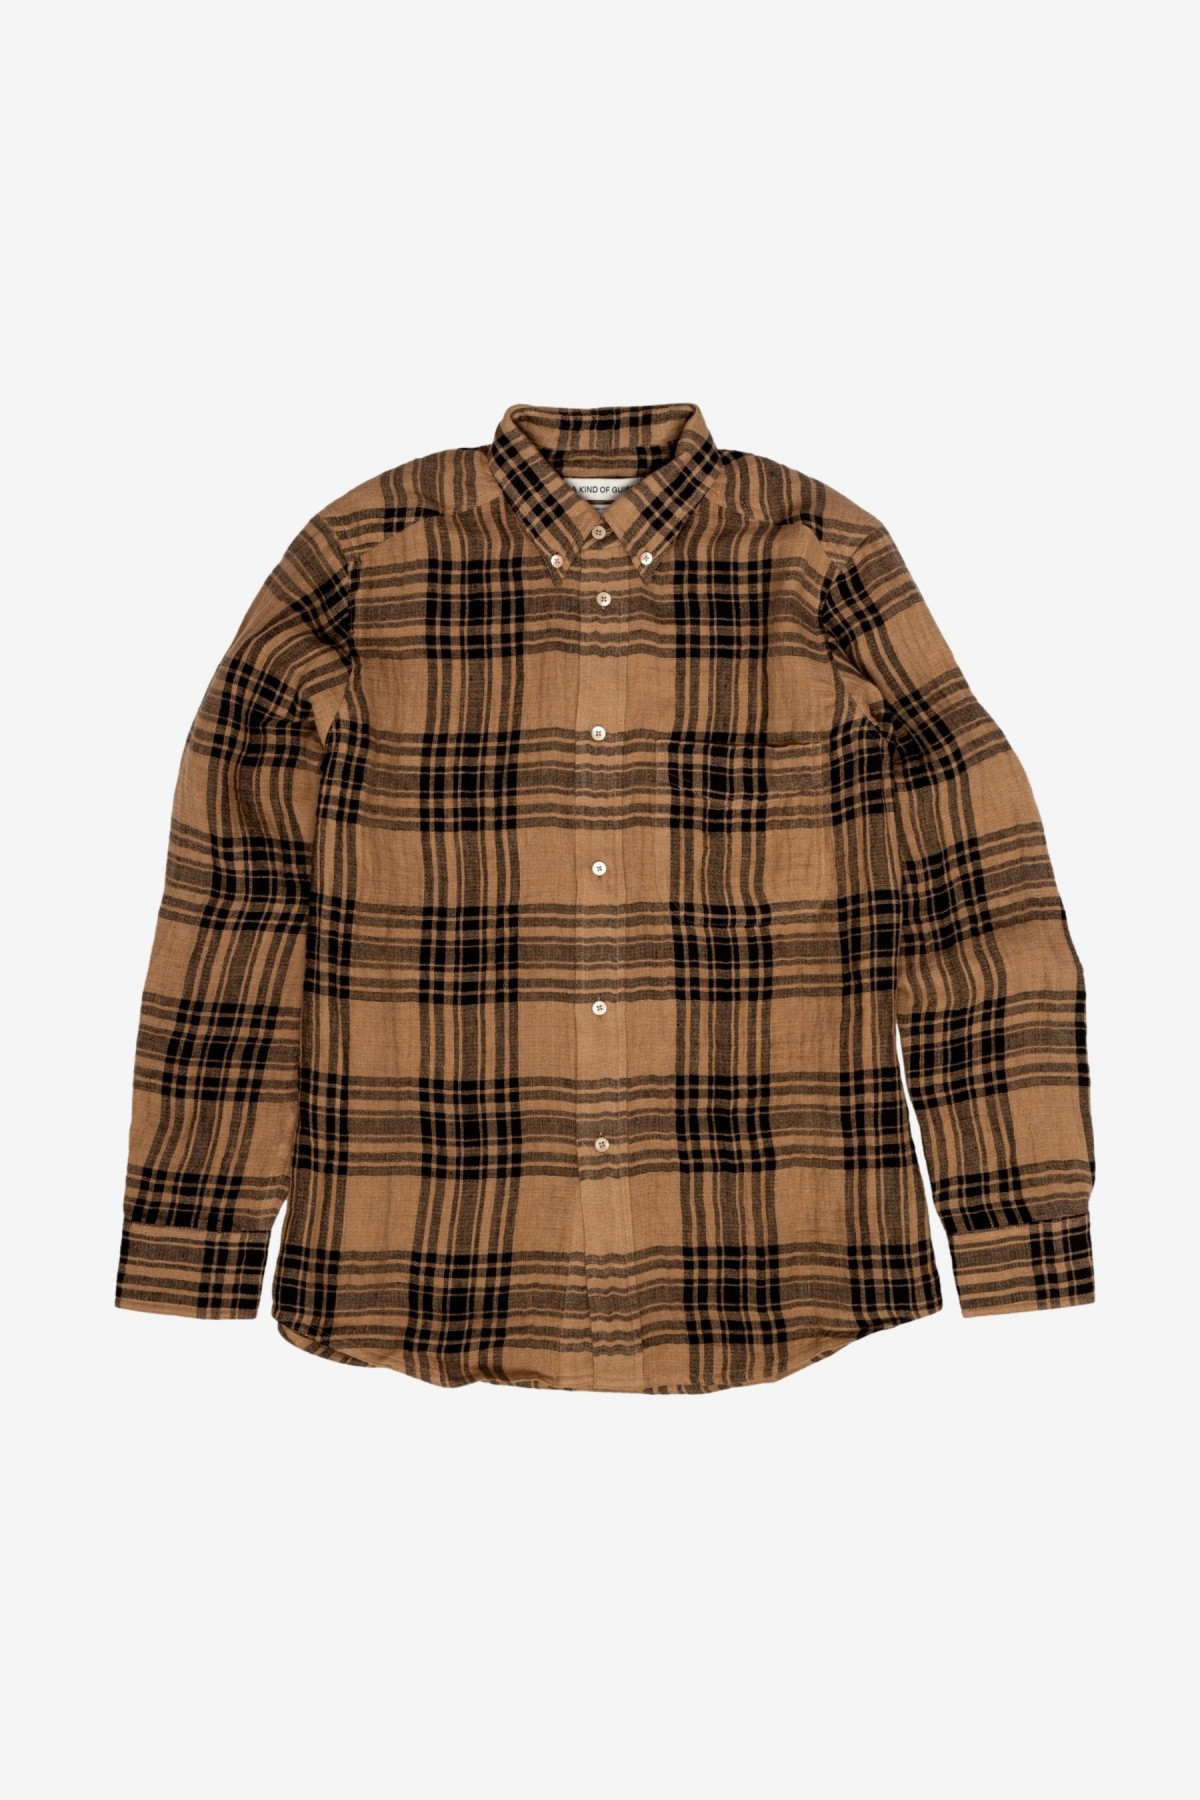 A Kind of Guise Seaton Button Down Shirt in Walnut Check